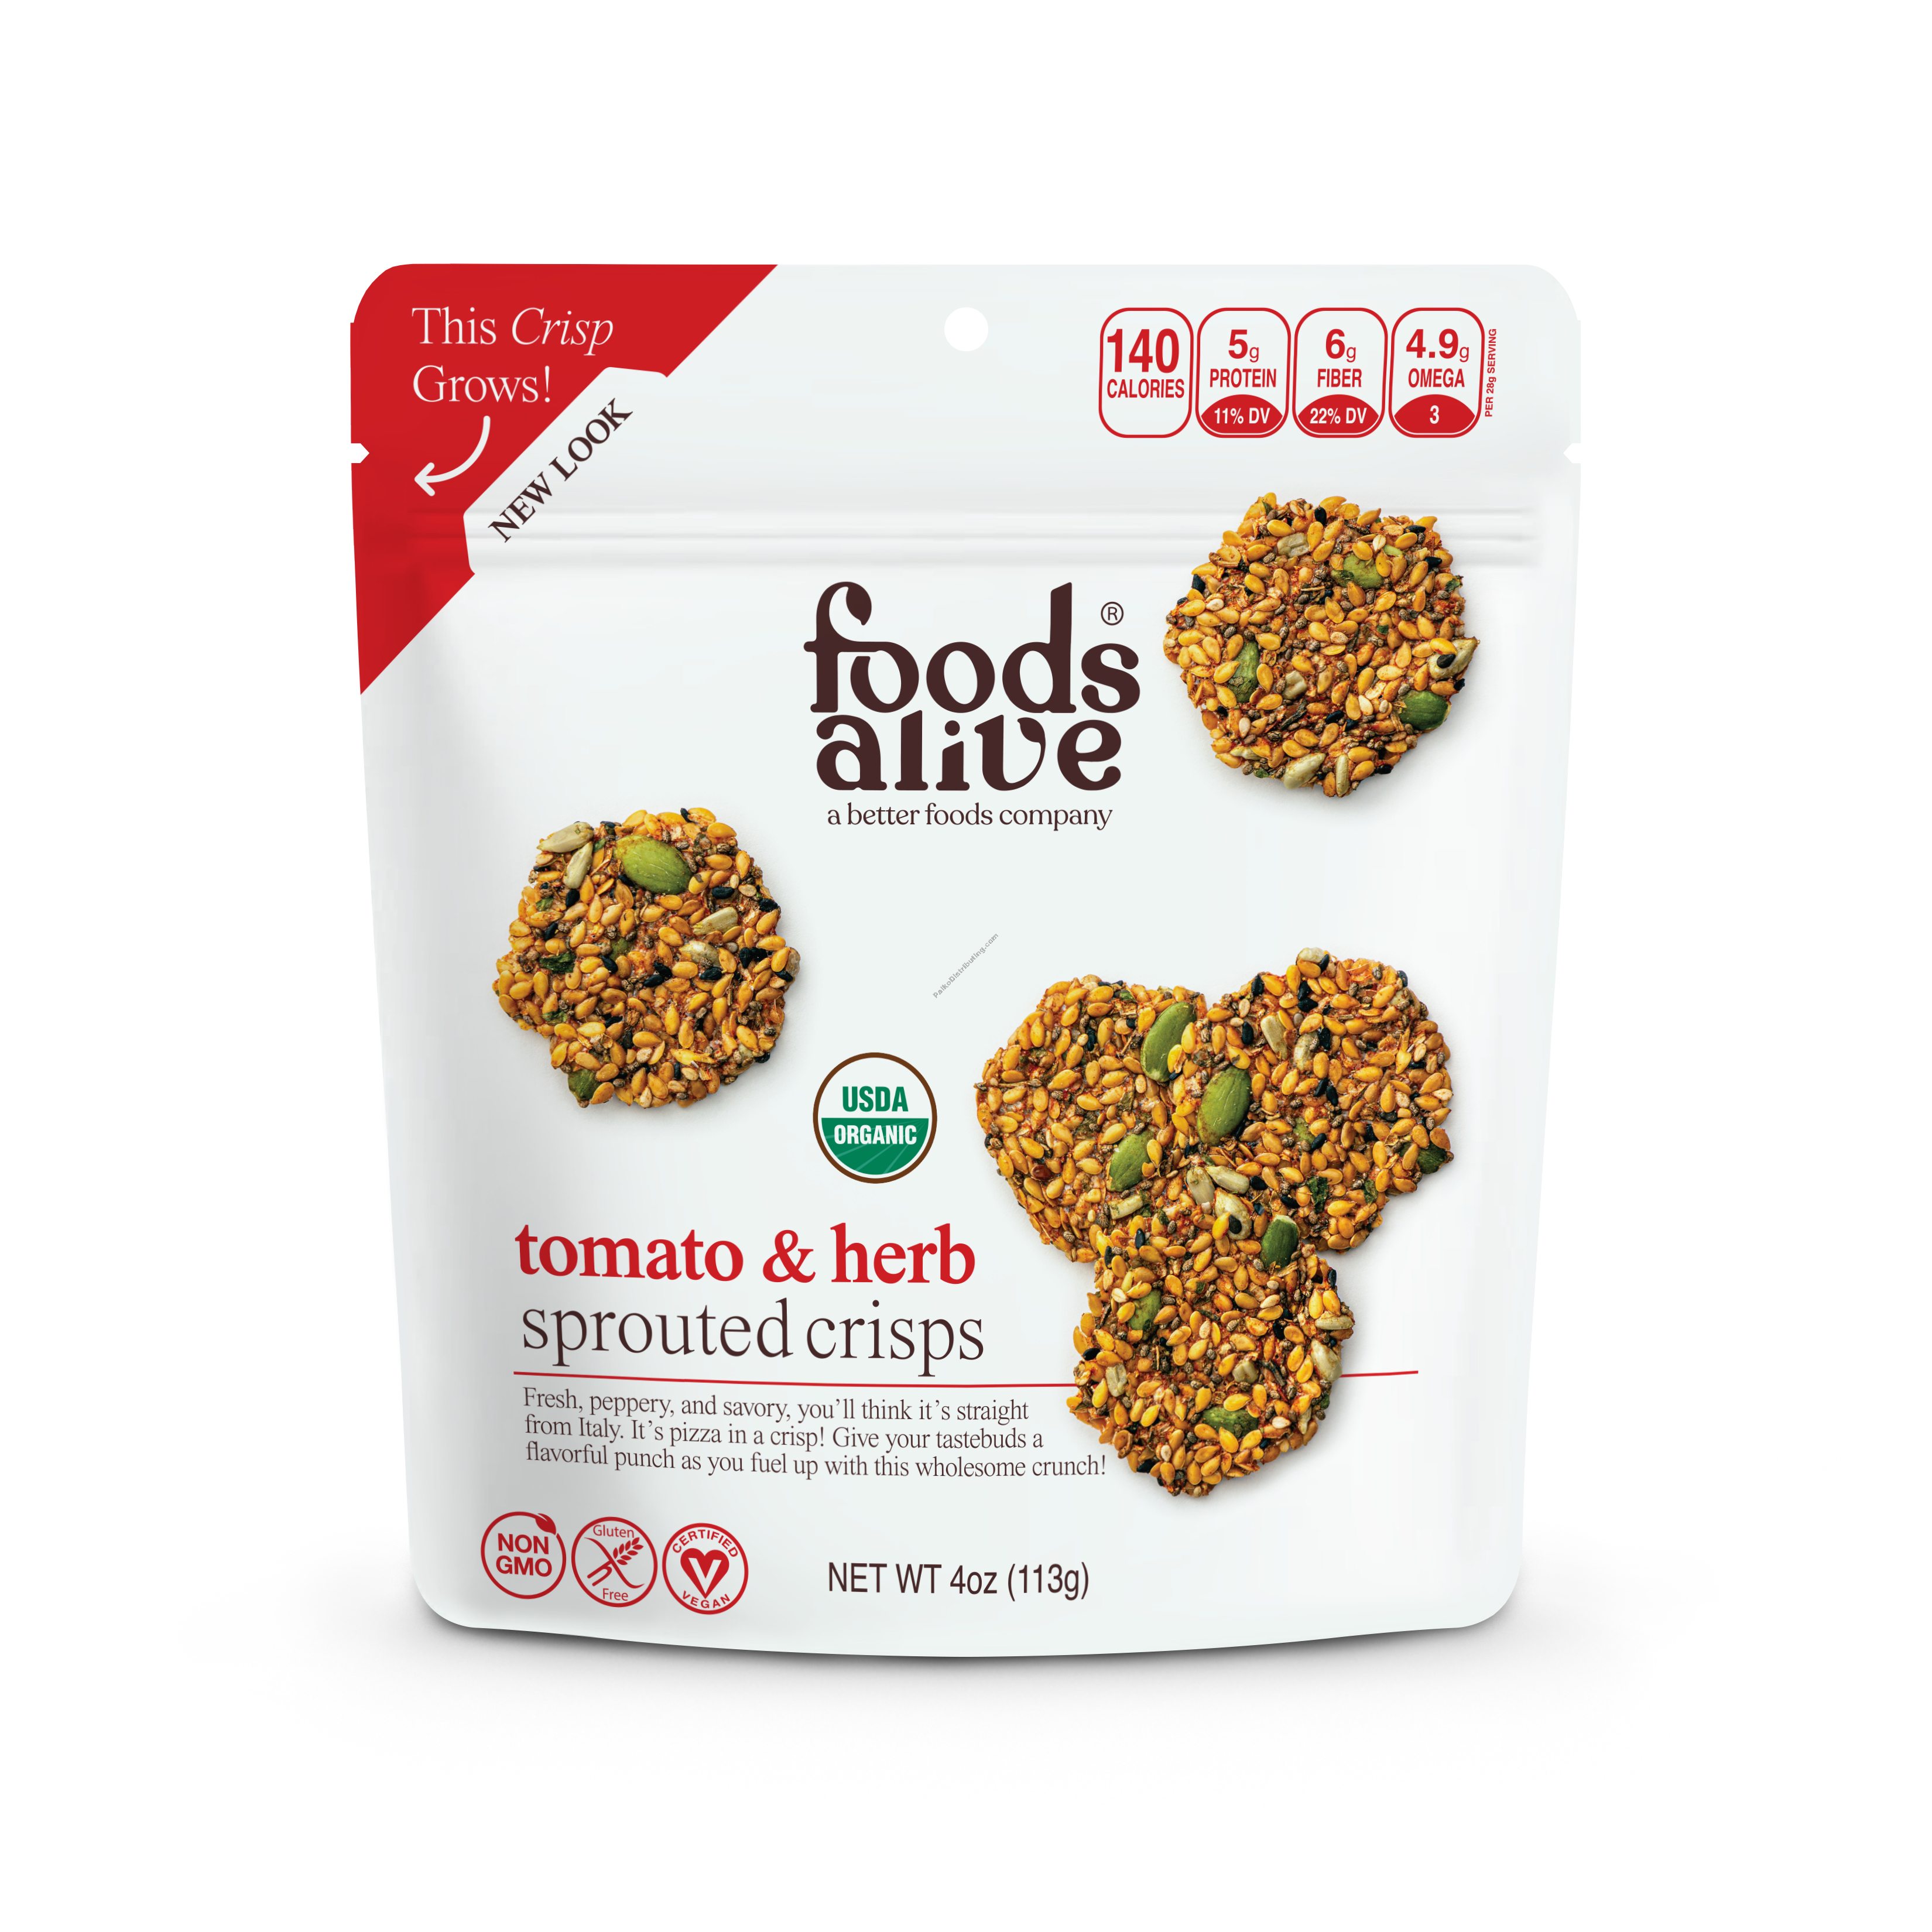 Product Image: Tomato & Herb Sprouted Crisps